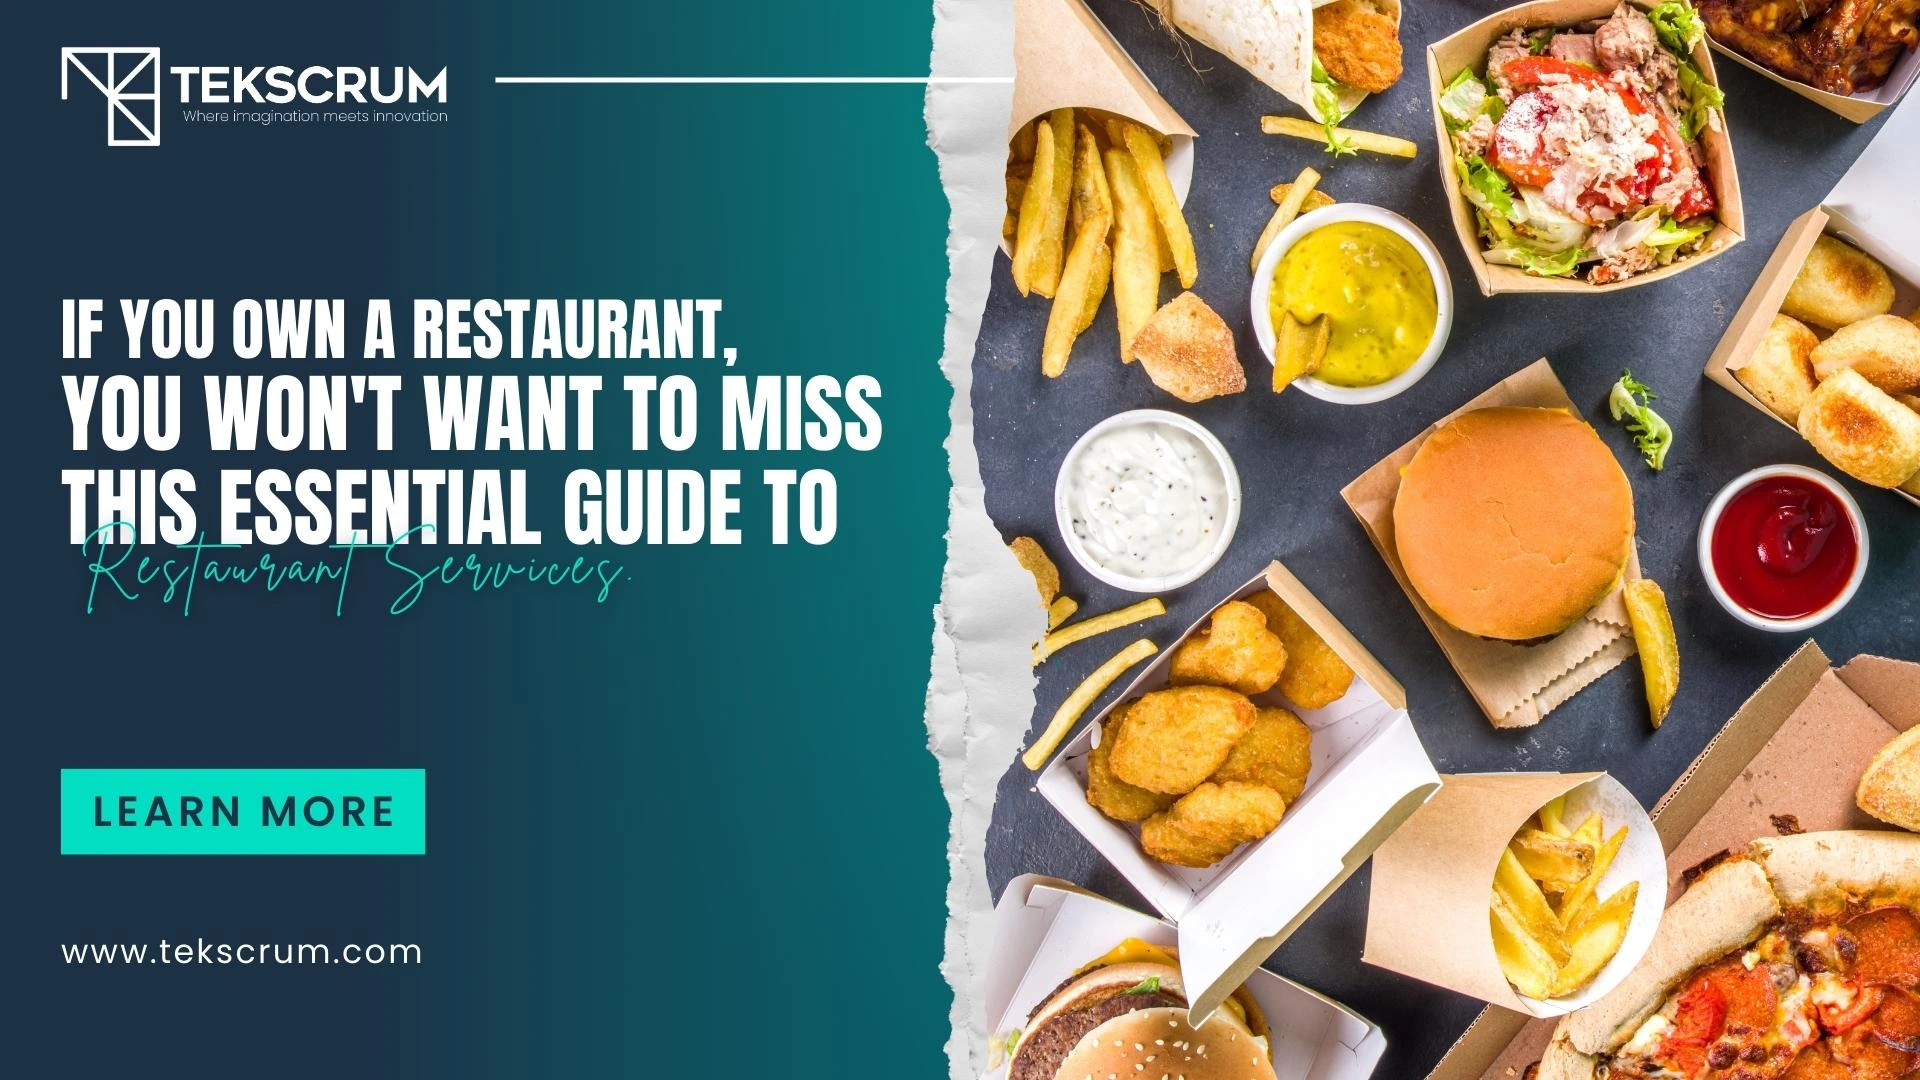 You are currently viewing If You Own a Restaurant, You Won’t Want to Miss This Essential Guide to Restaurant Services